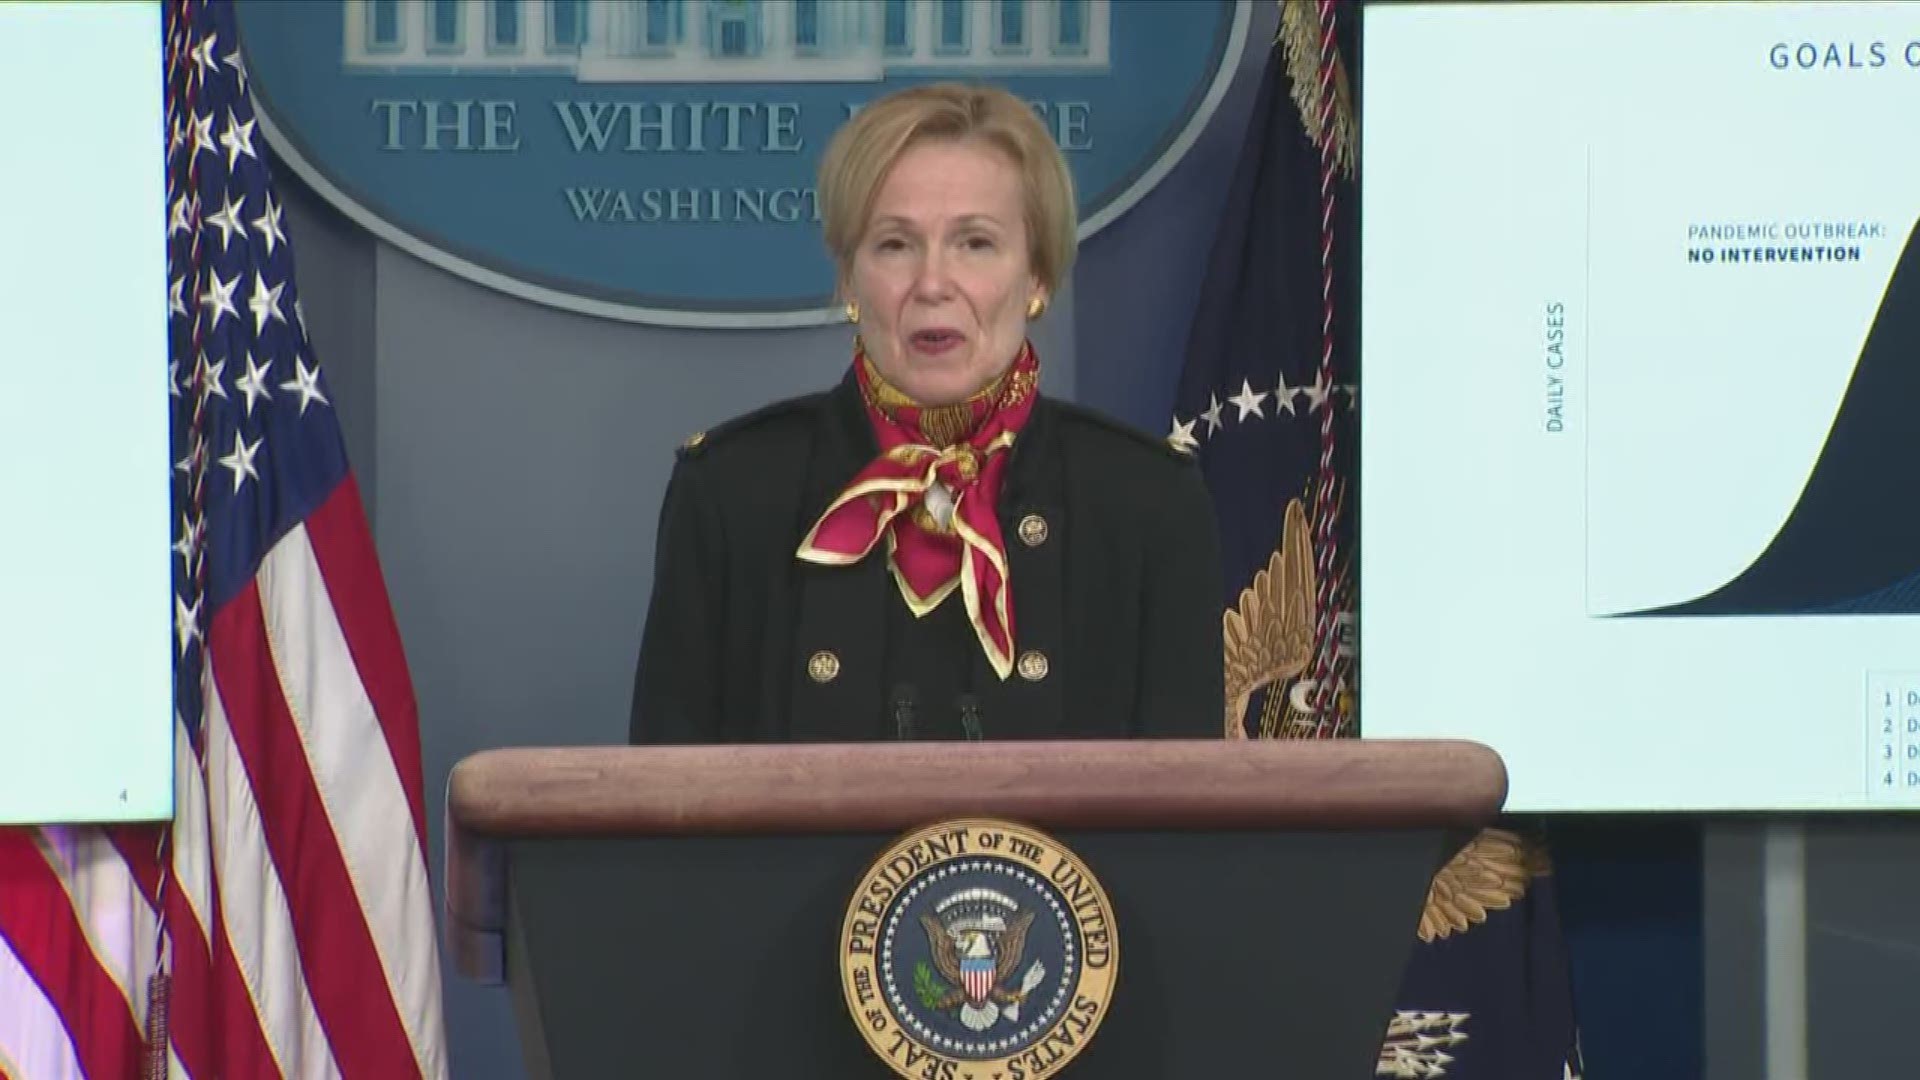 Dr. Birx said Tuesday that the White House coronavirus task force projects there will be 100,000 to 240,000 deaths if the US maintains social distancing rules.